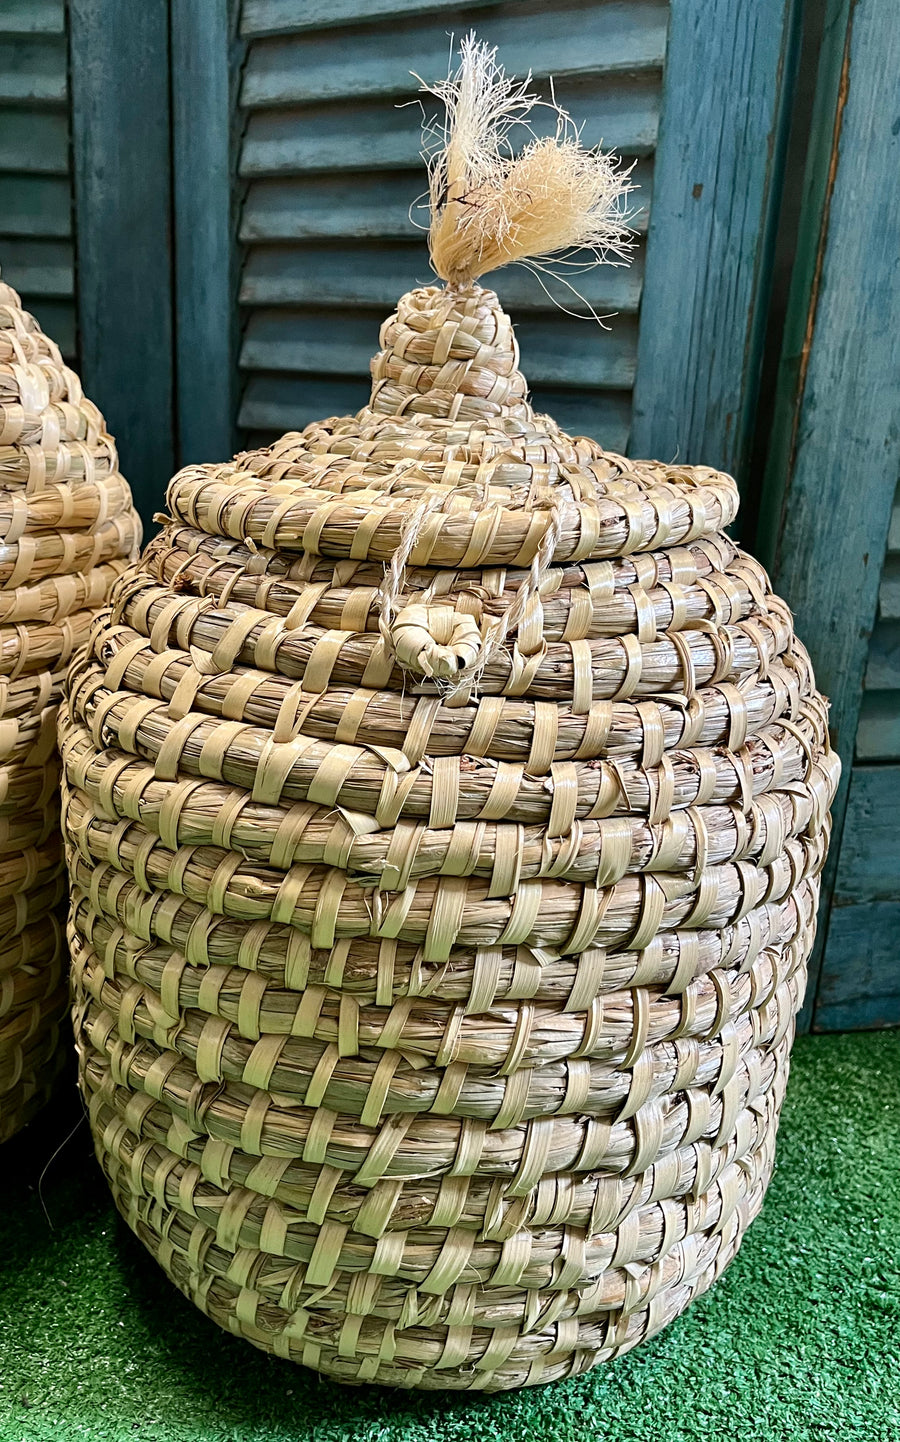 Oval Seagrass Basket with Lid